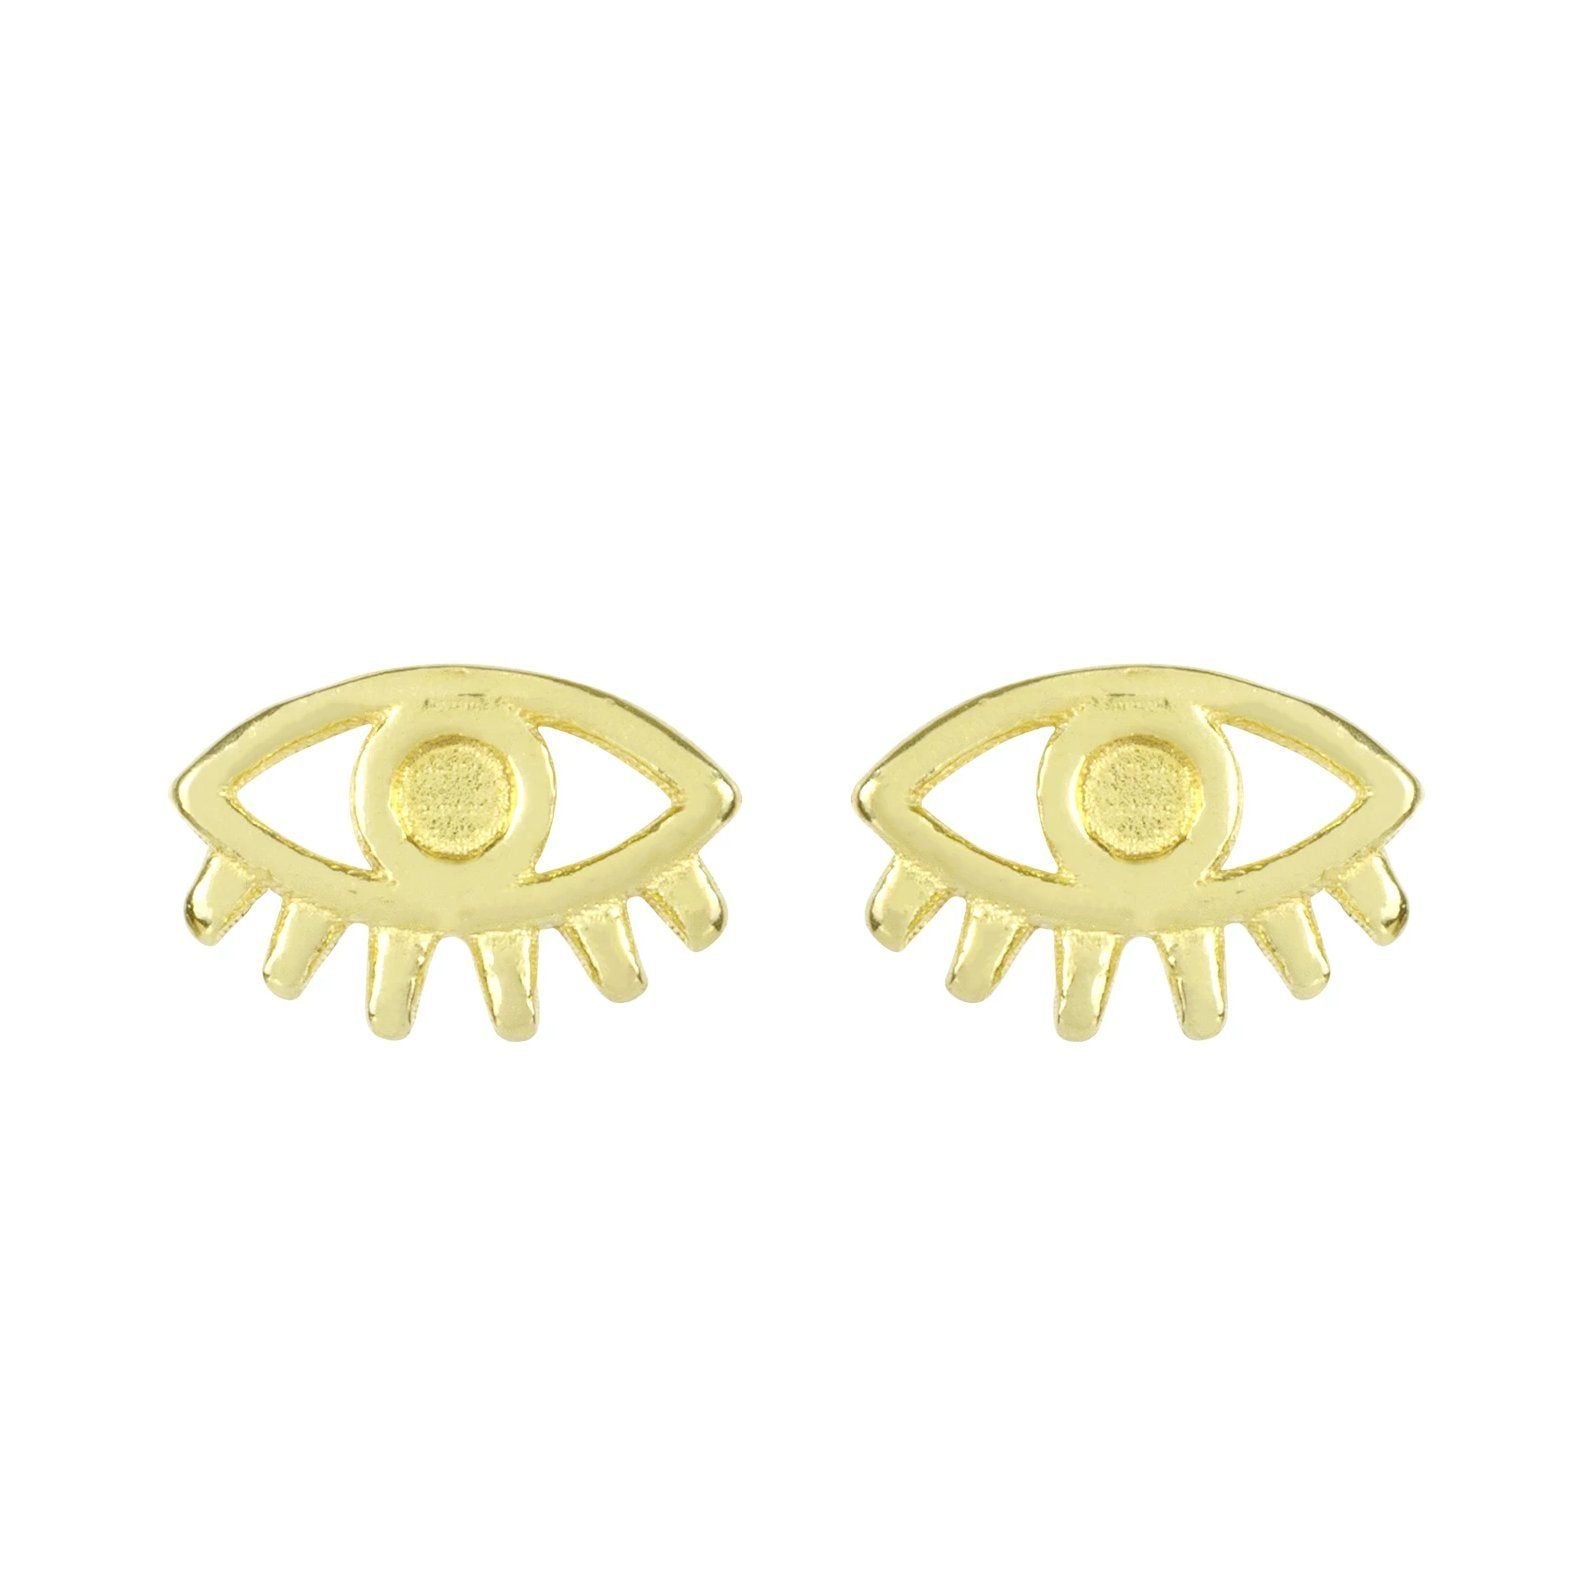 Good vibes. Lucky charm. Protector of evil spirits. No matter which way you put it, the Evil Eye Stud Earrings are a good omen and carries only well wishes along with it.